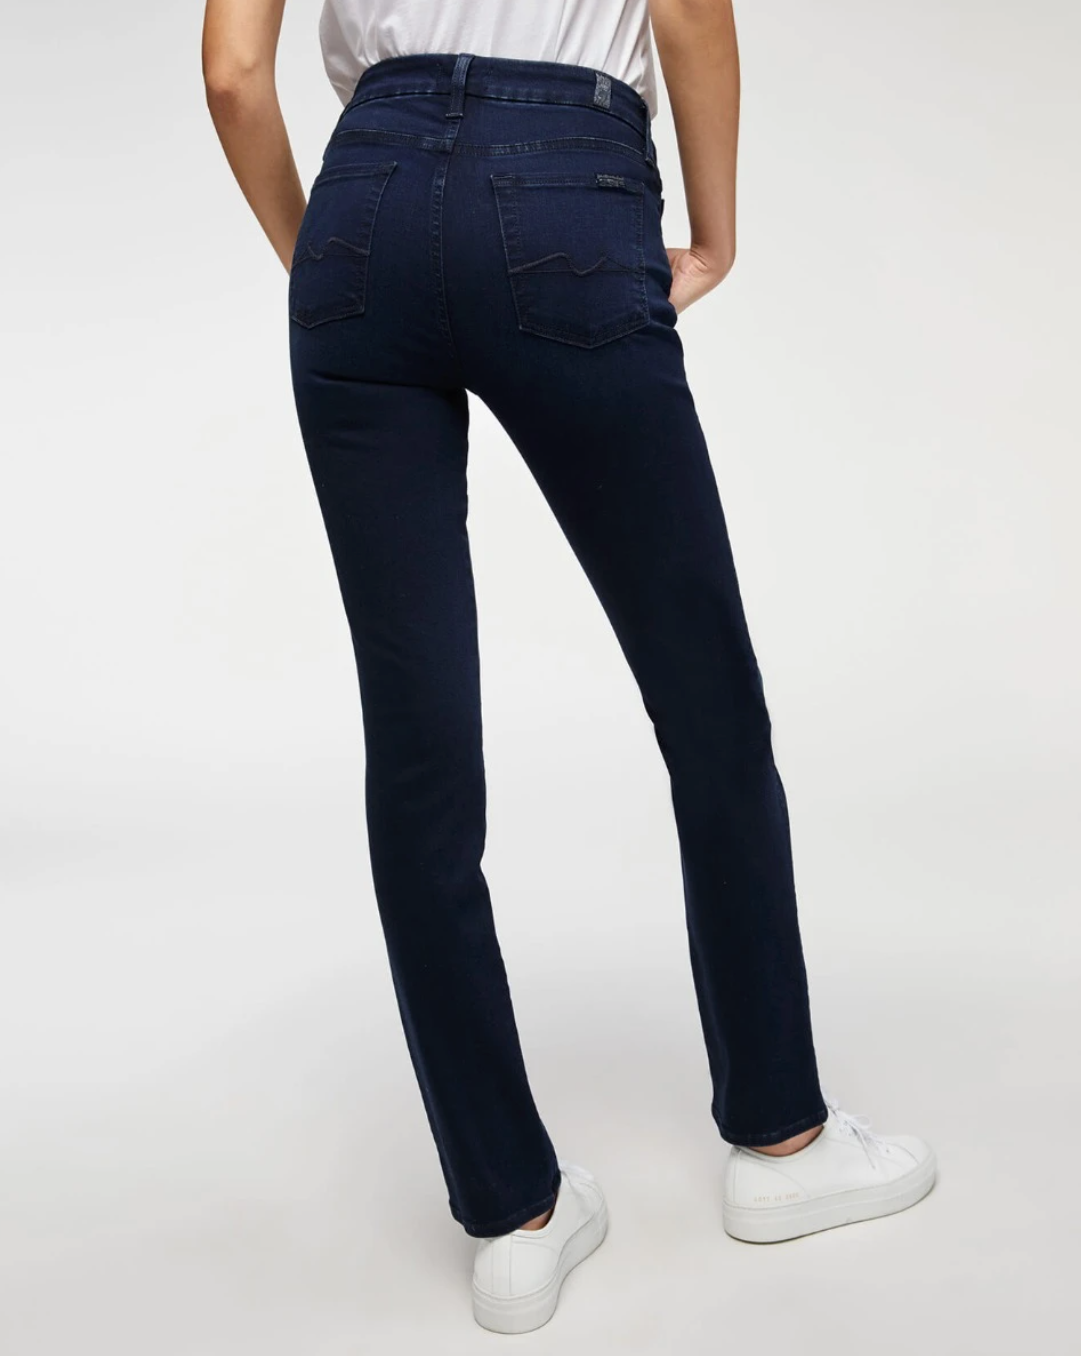 7 for all mankind kimmie mid rise straight dark blue back